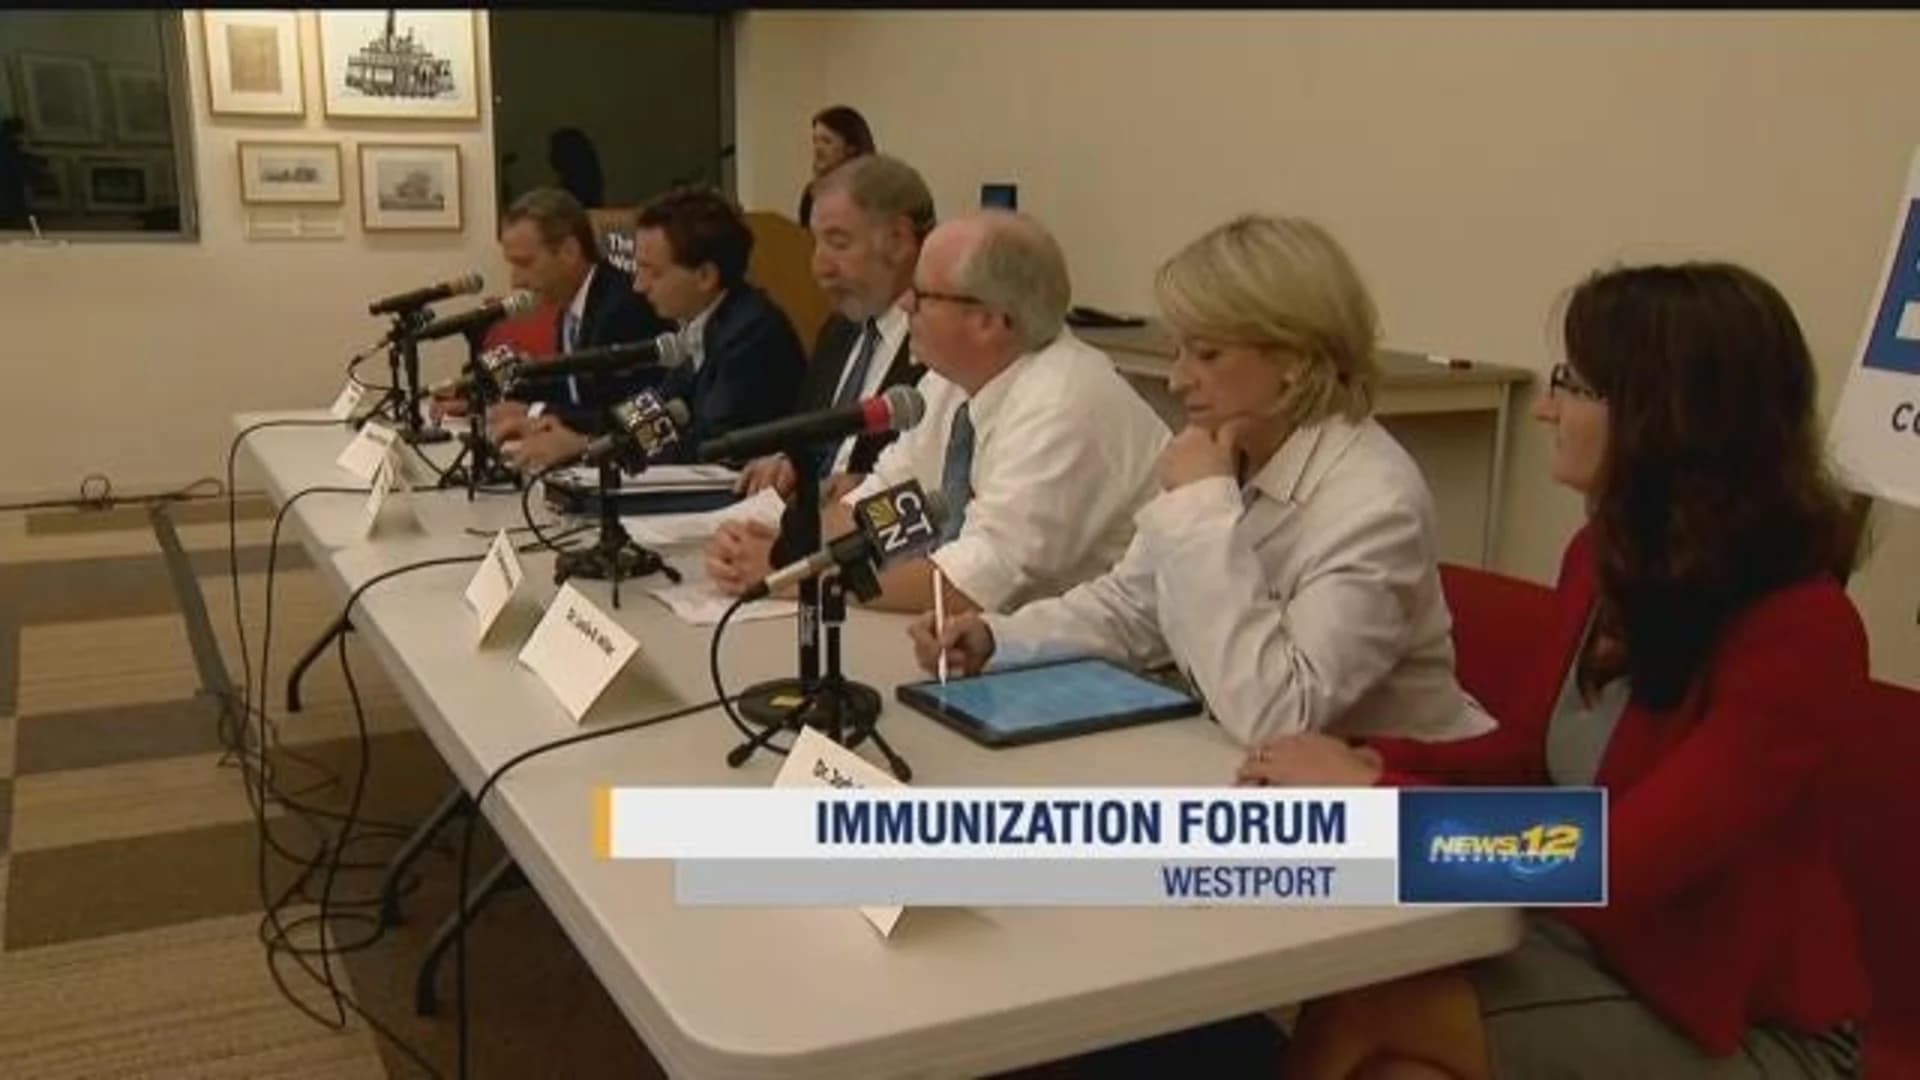 State leaders call to end religious exemptions of immunizations